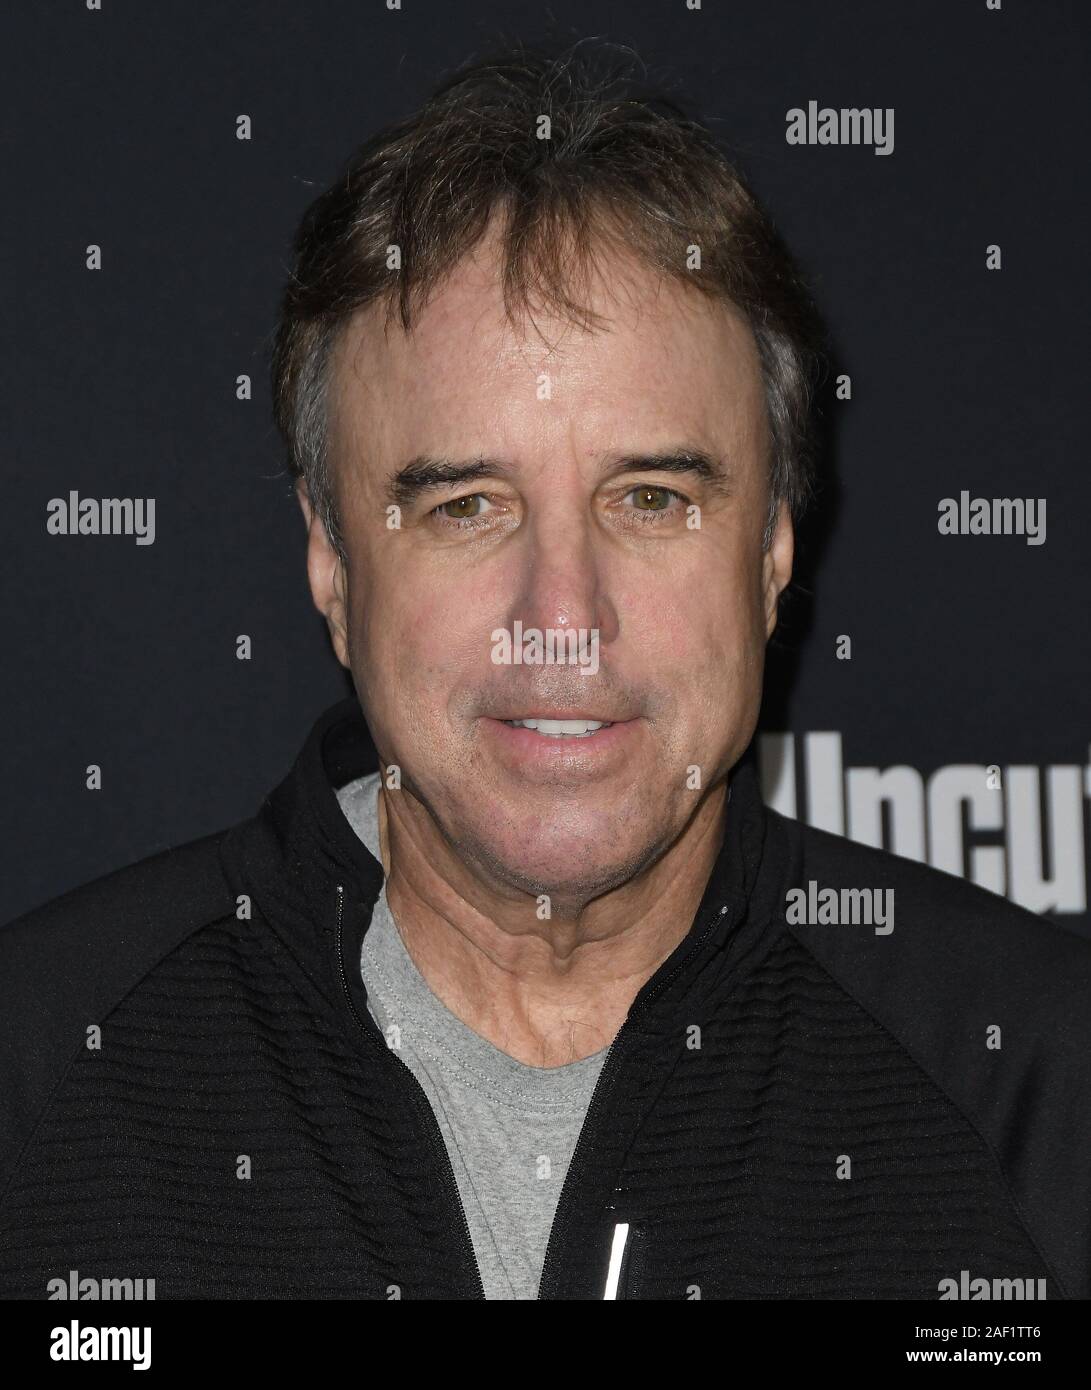 Los Angeles, USA. 11th Dec, 2019. Kevin Nealon arrives at the UNCUT GEMS Los Angeles Premiere held at the ArcLight Cinerama Dome in Los Angeles, CA on Wednesday, ?December 11, 2019. (Photo By Sthanlee B. Mirador/Sipa USA) Credit: Sipa USA/Alamy Live News Stock Photo